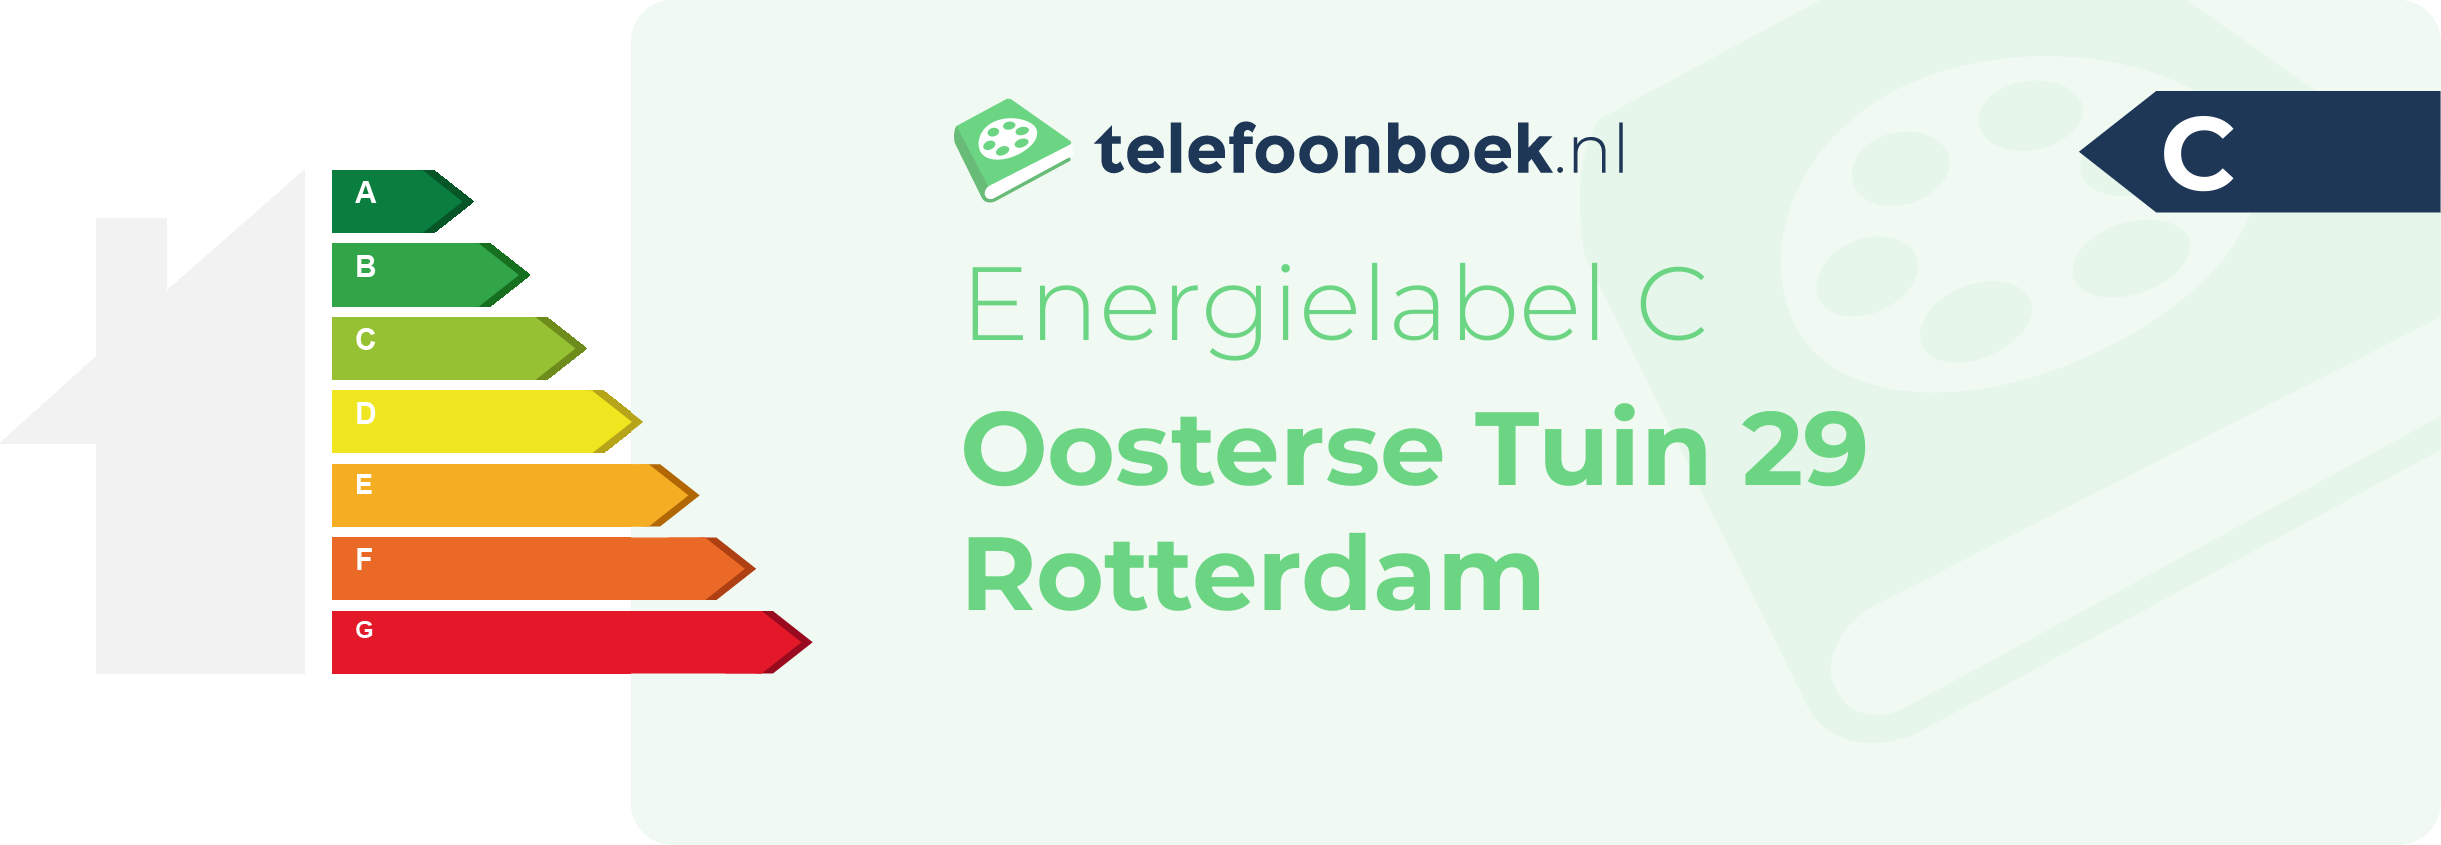 Energielabel Oosterse Tuin 29 Rotterdam